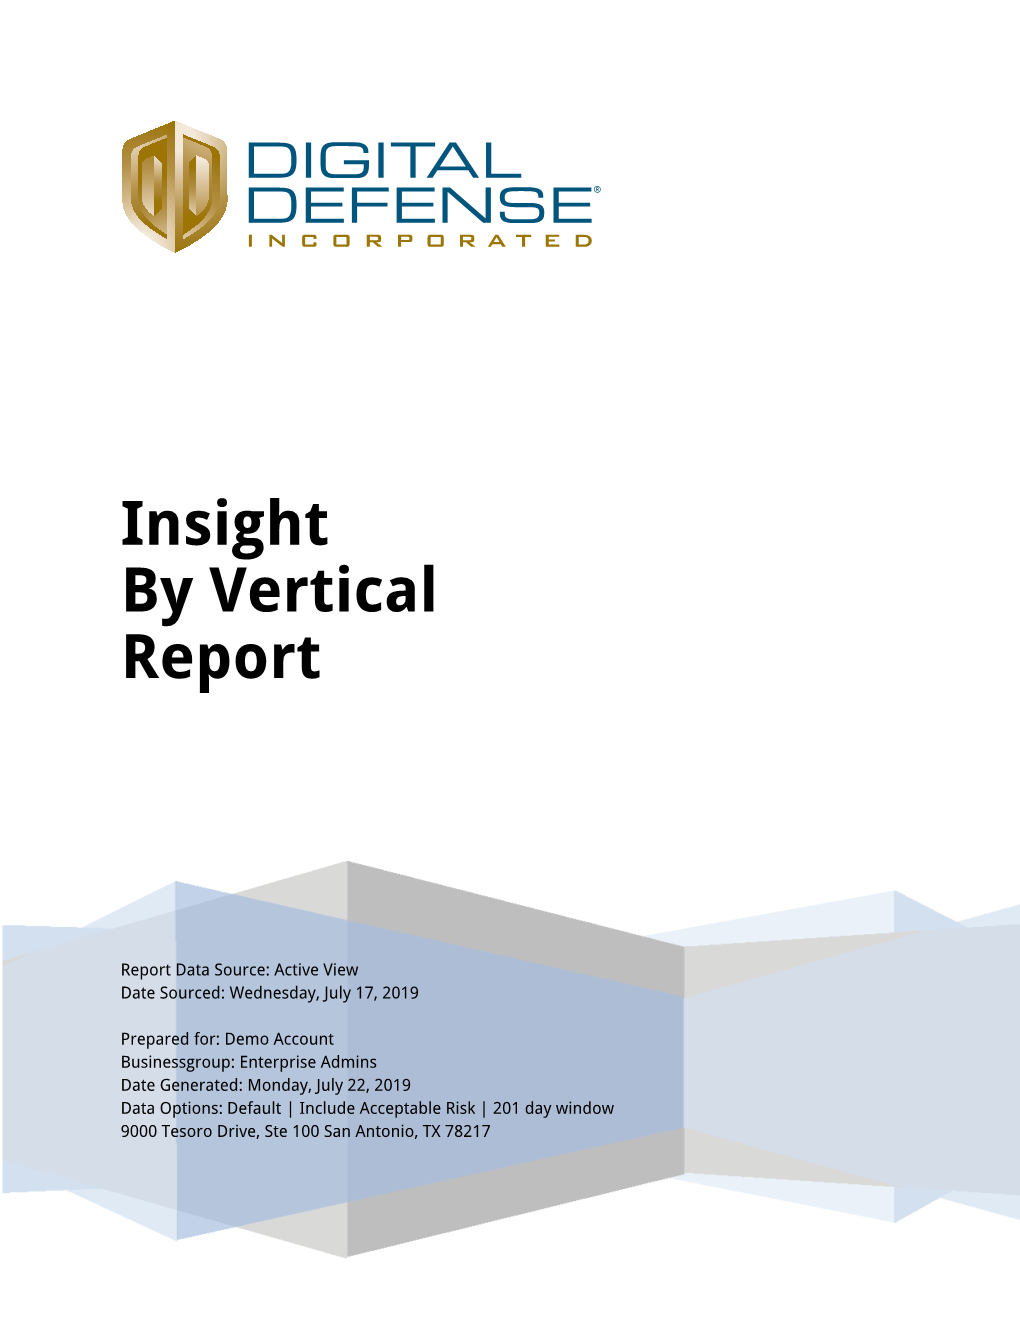 Insight by Vertical Report